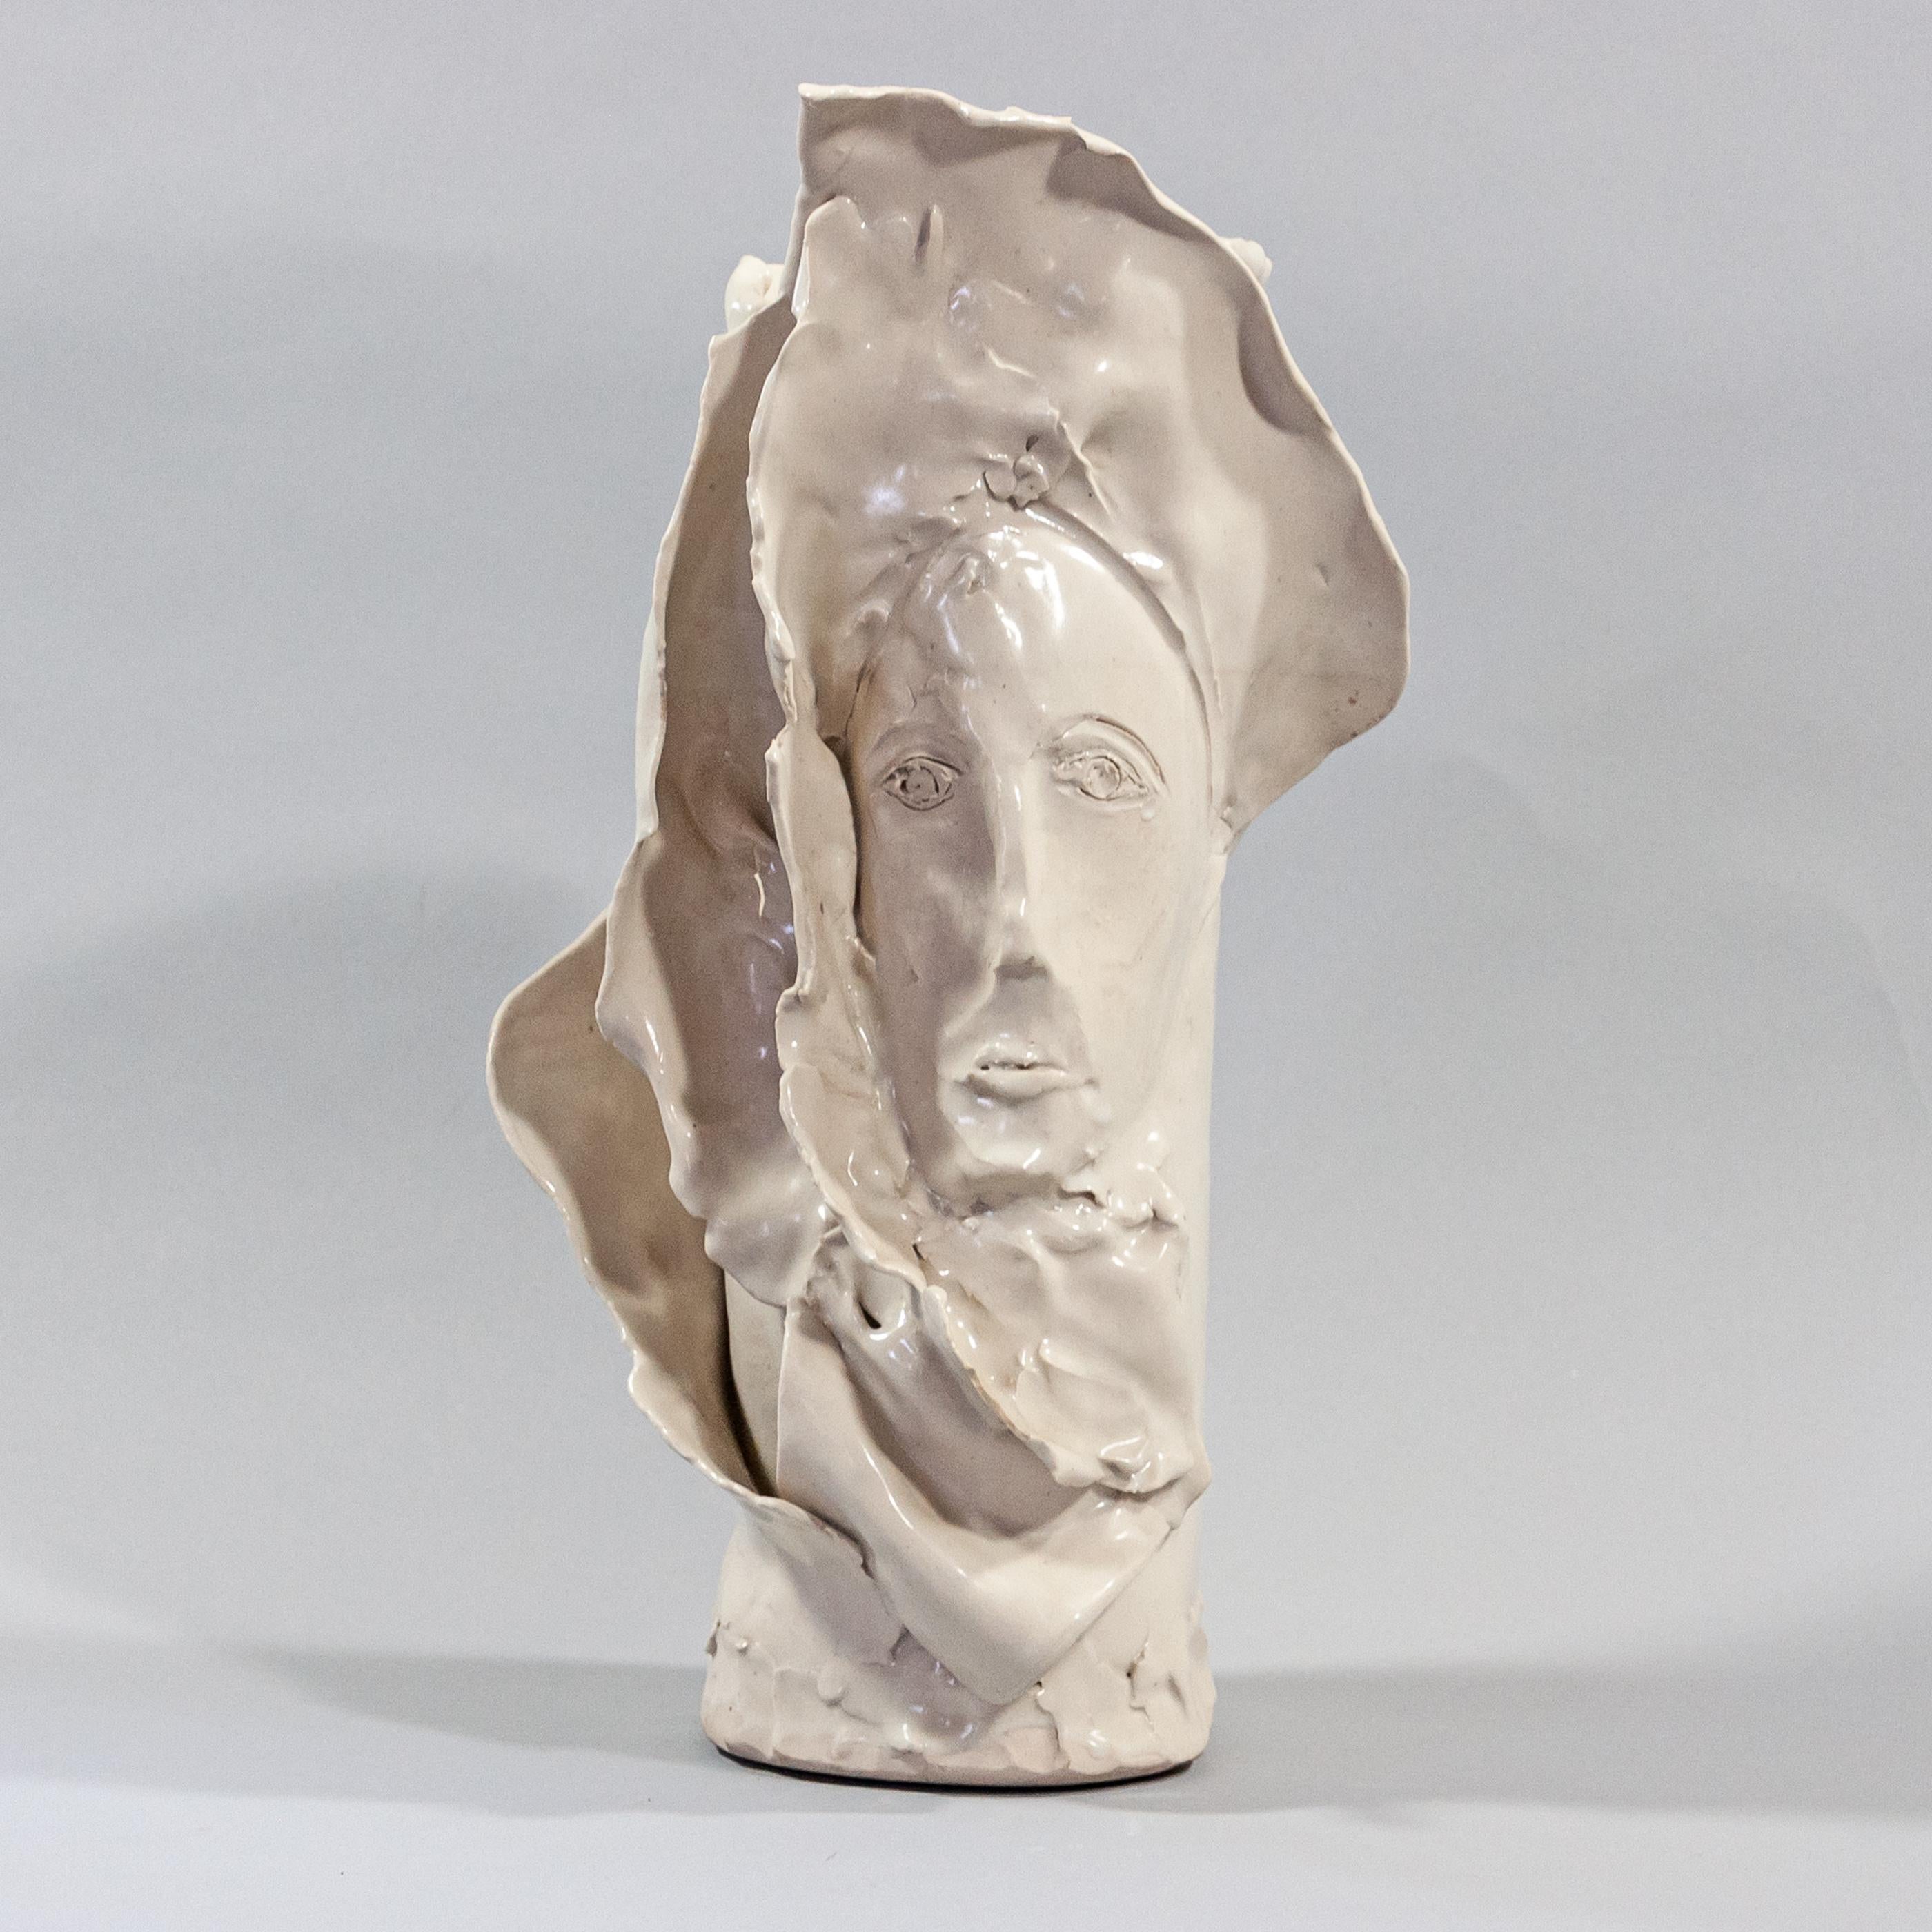 Lois Sattler Abstract Sculpture - White porcelain vase with face #2